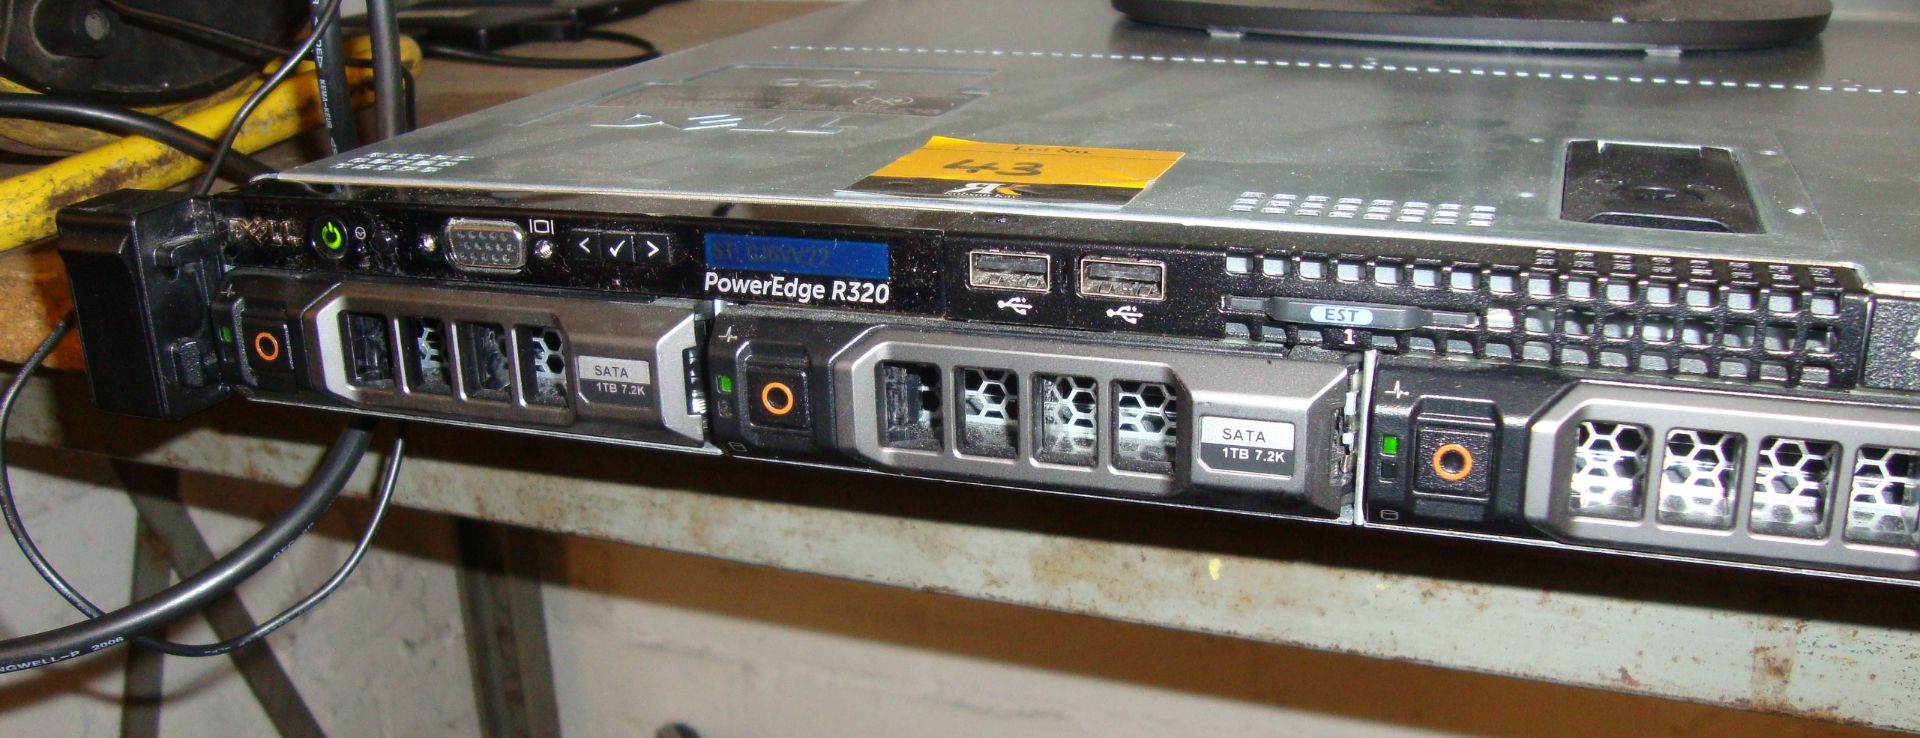 Dell PowerEdge R320 rack mountable server with 2.4GHz Intel Xeon processors, 16Gb RAM with RAID 5 - Image 14 of 18